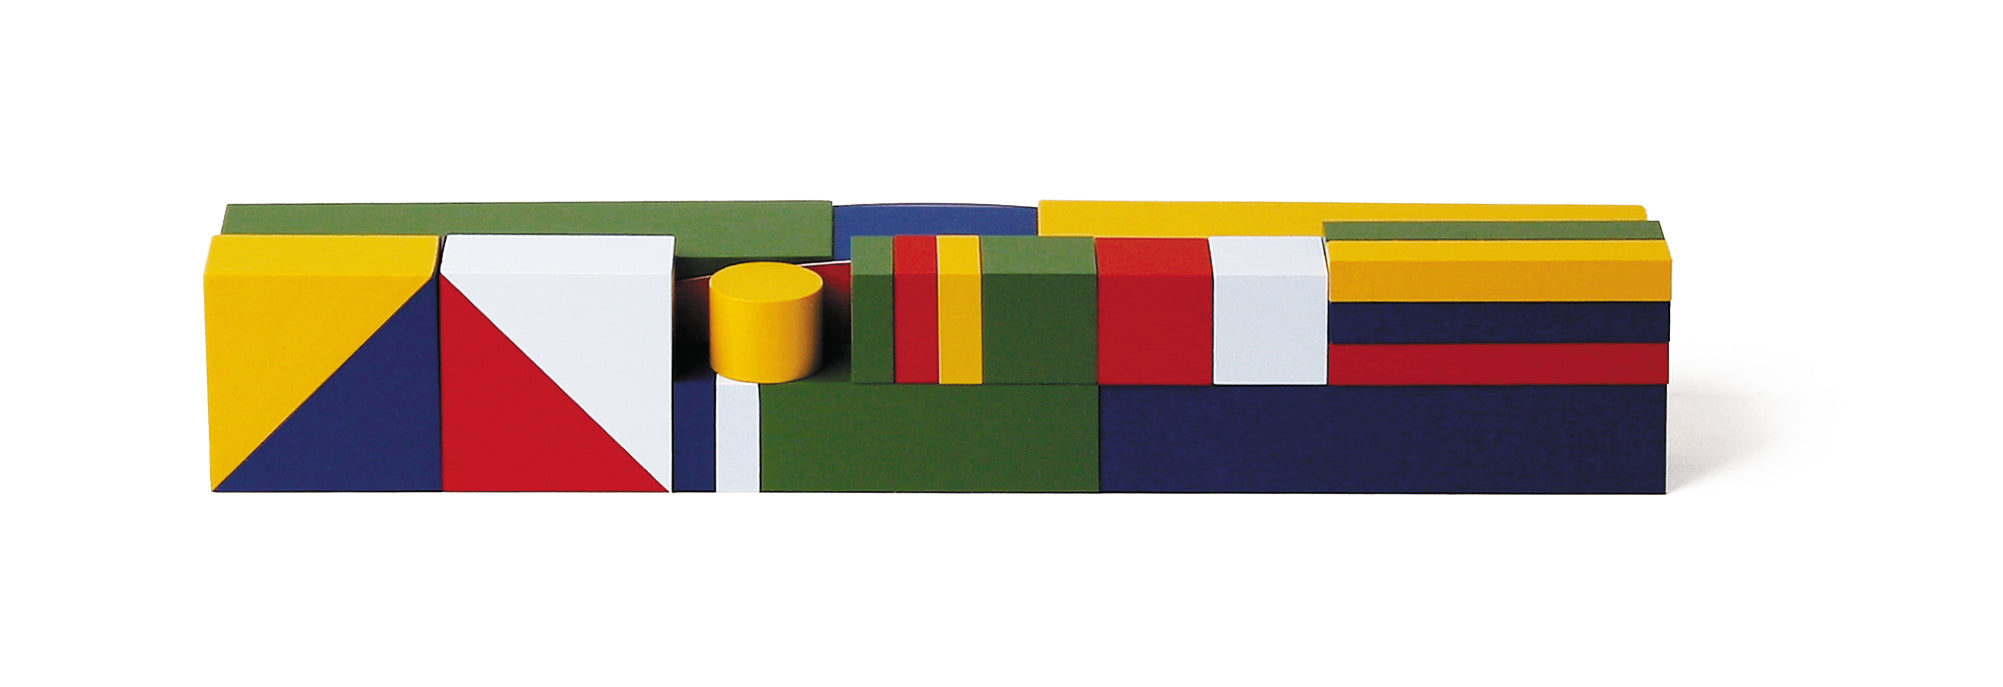 Bauhaus construction gameWooden Toy by Naef Swiss since 1954